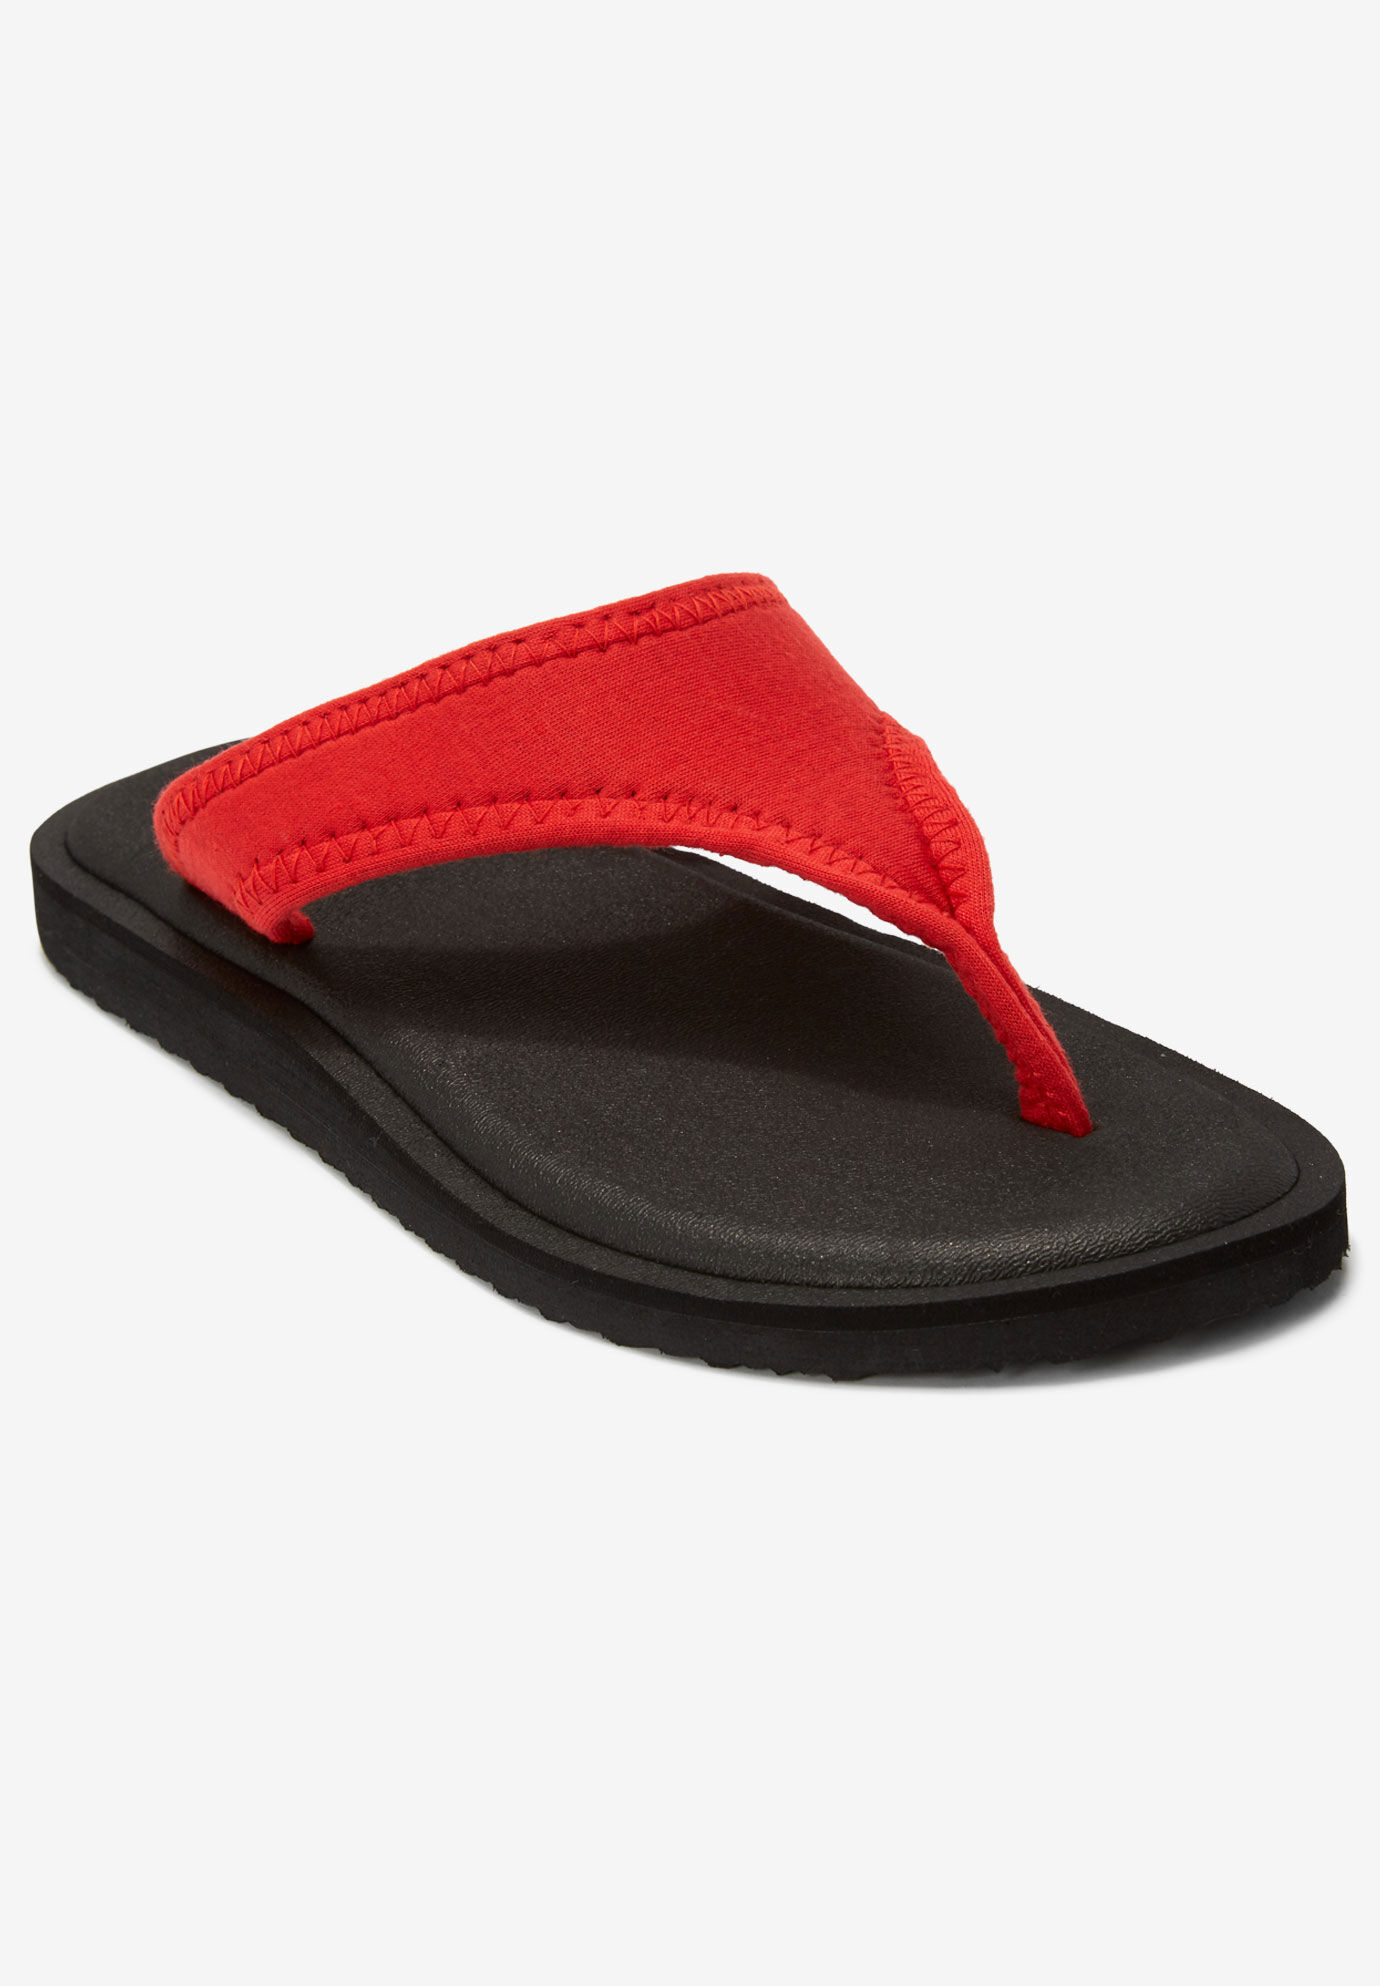 red wide width wedges